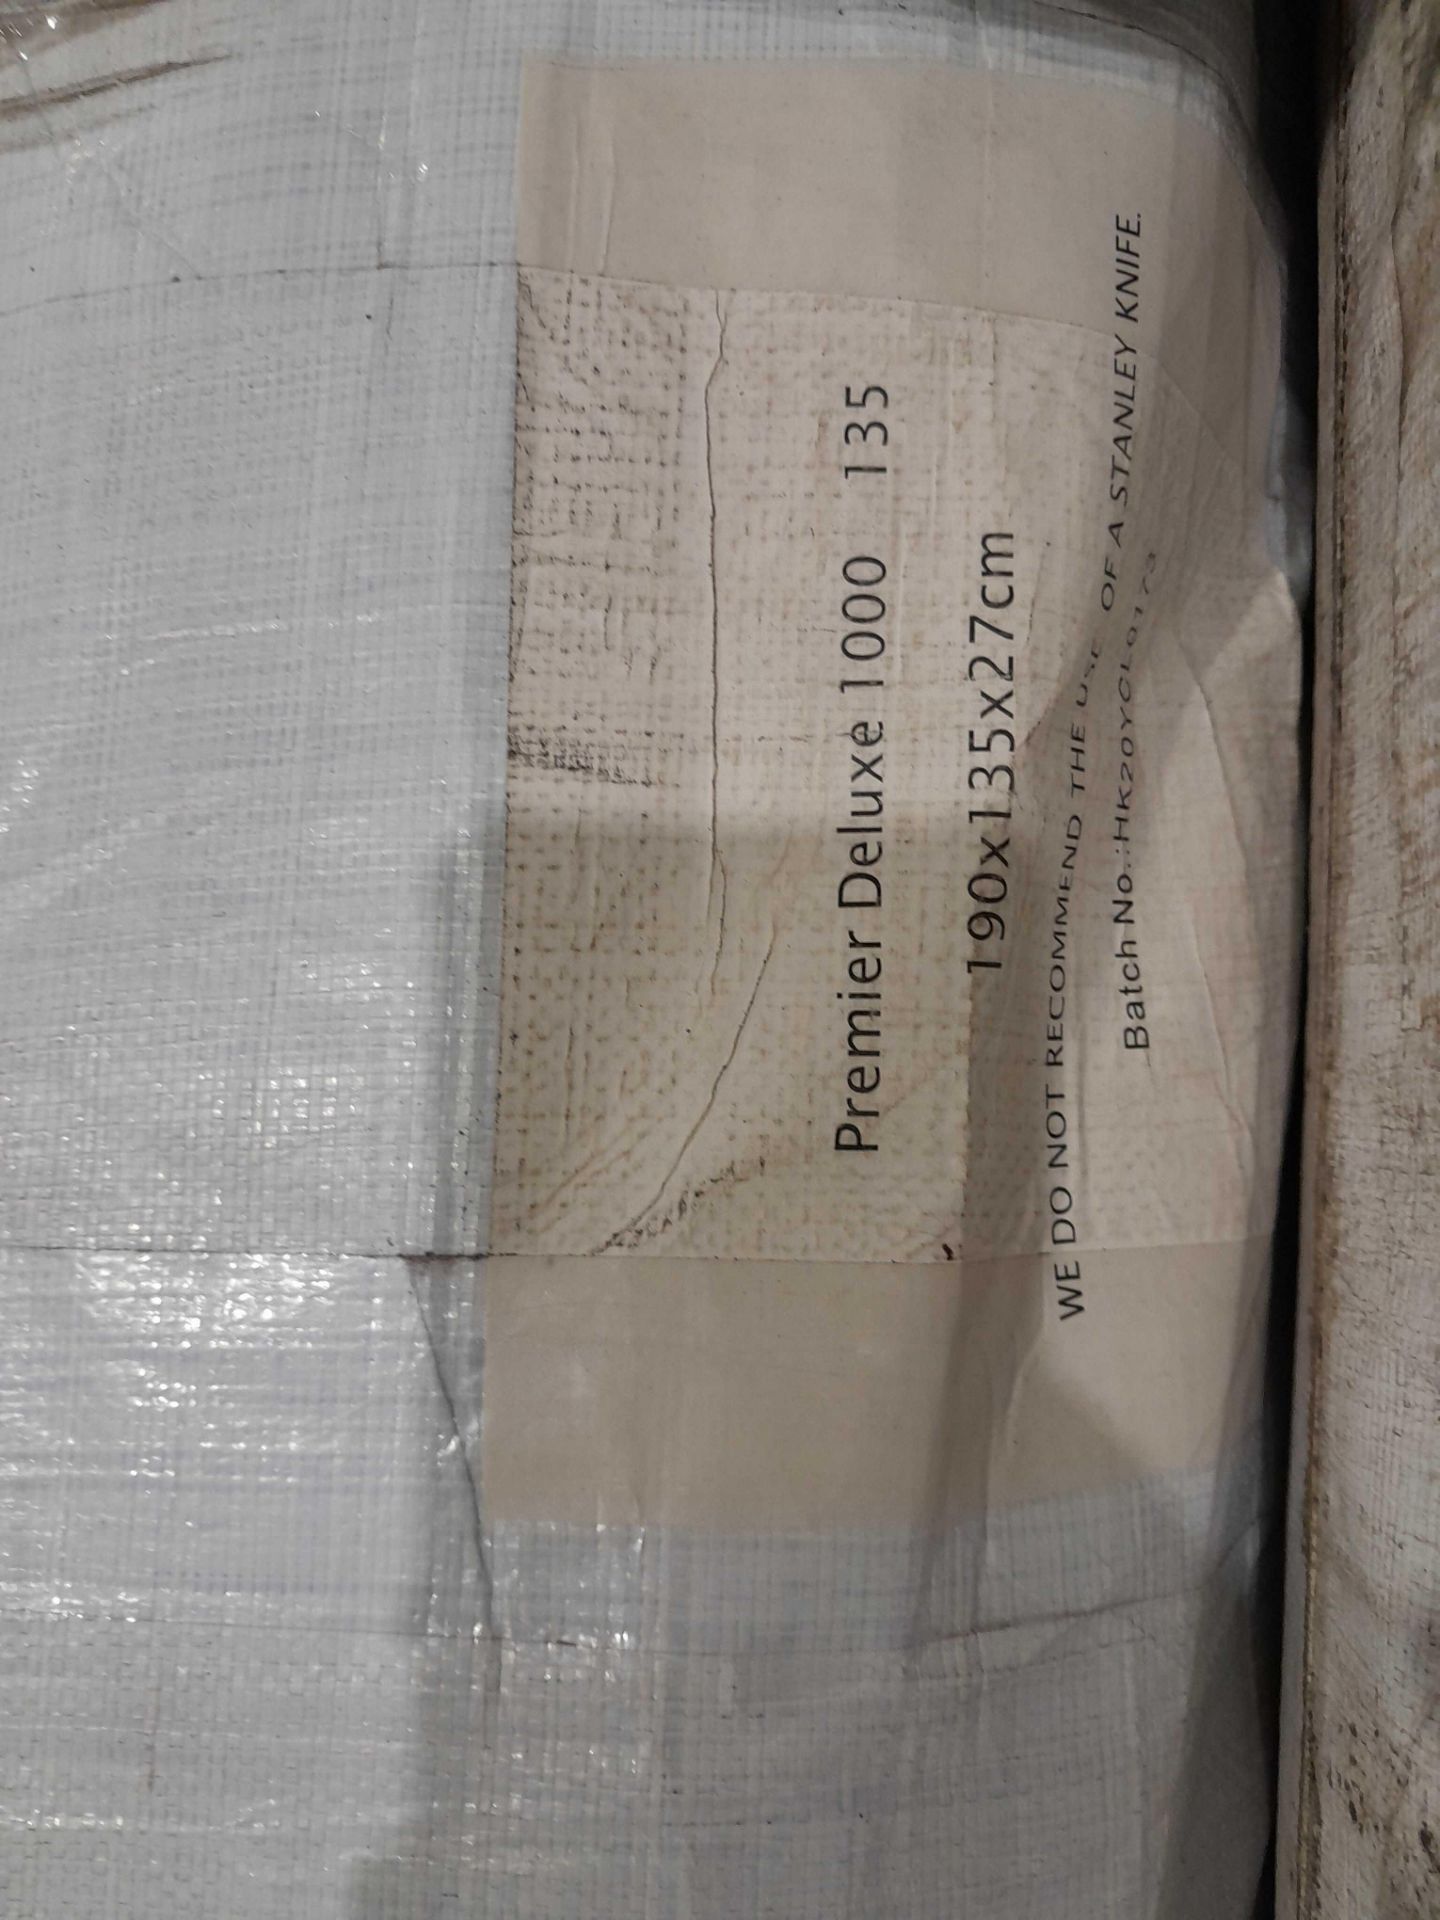 RRP £380 Brand New Factory Sealed Silva 1000 Double Mattress - Image 2 of 2